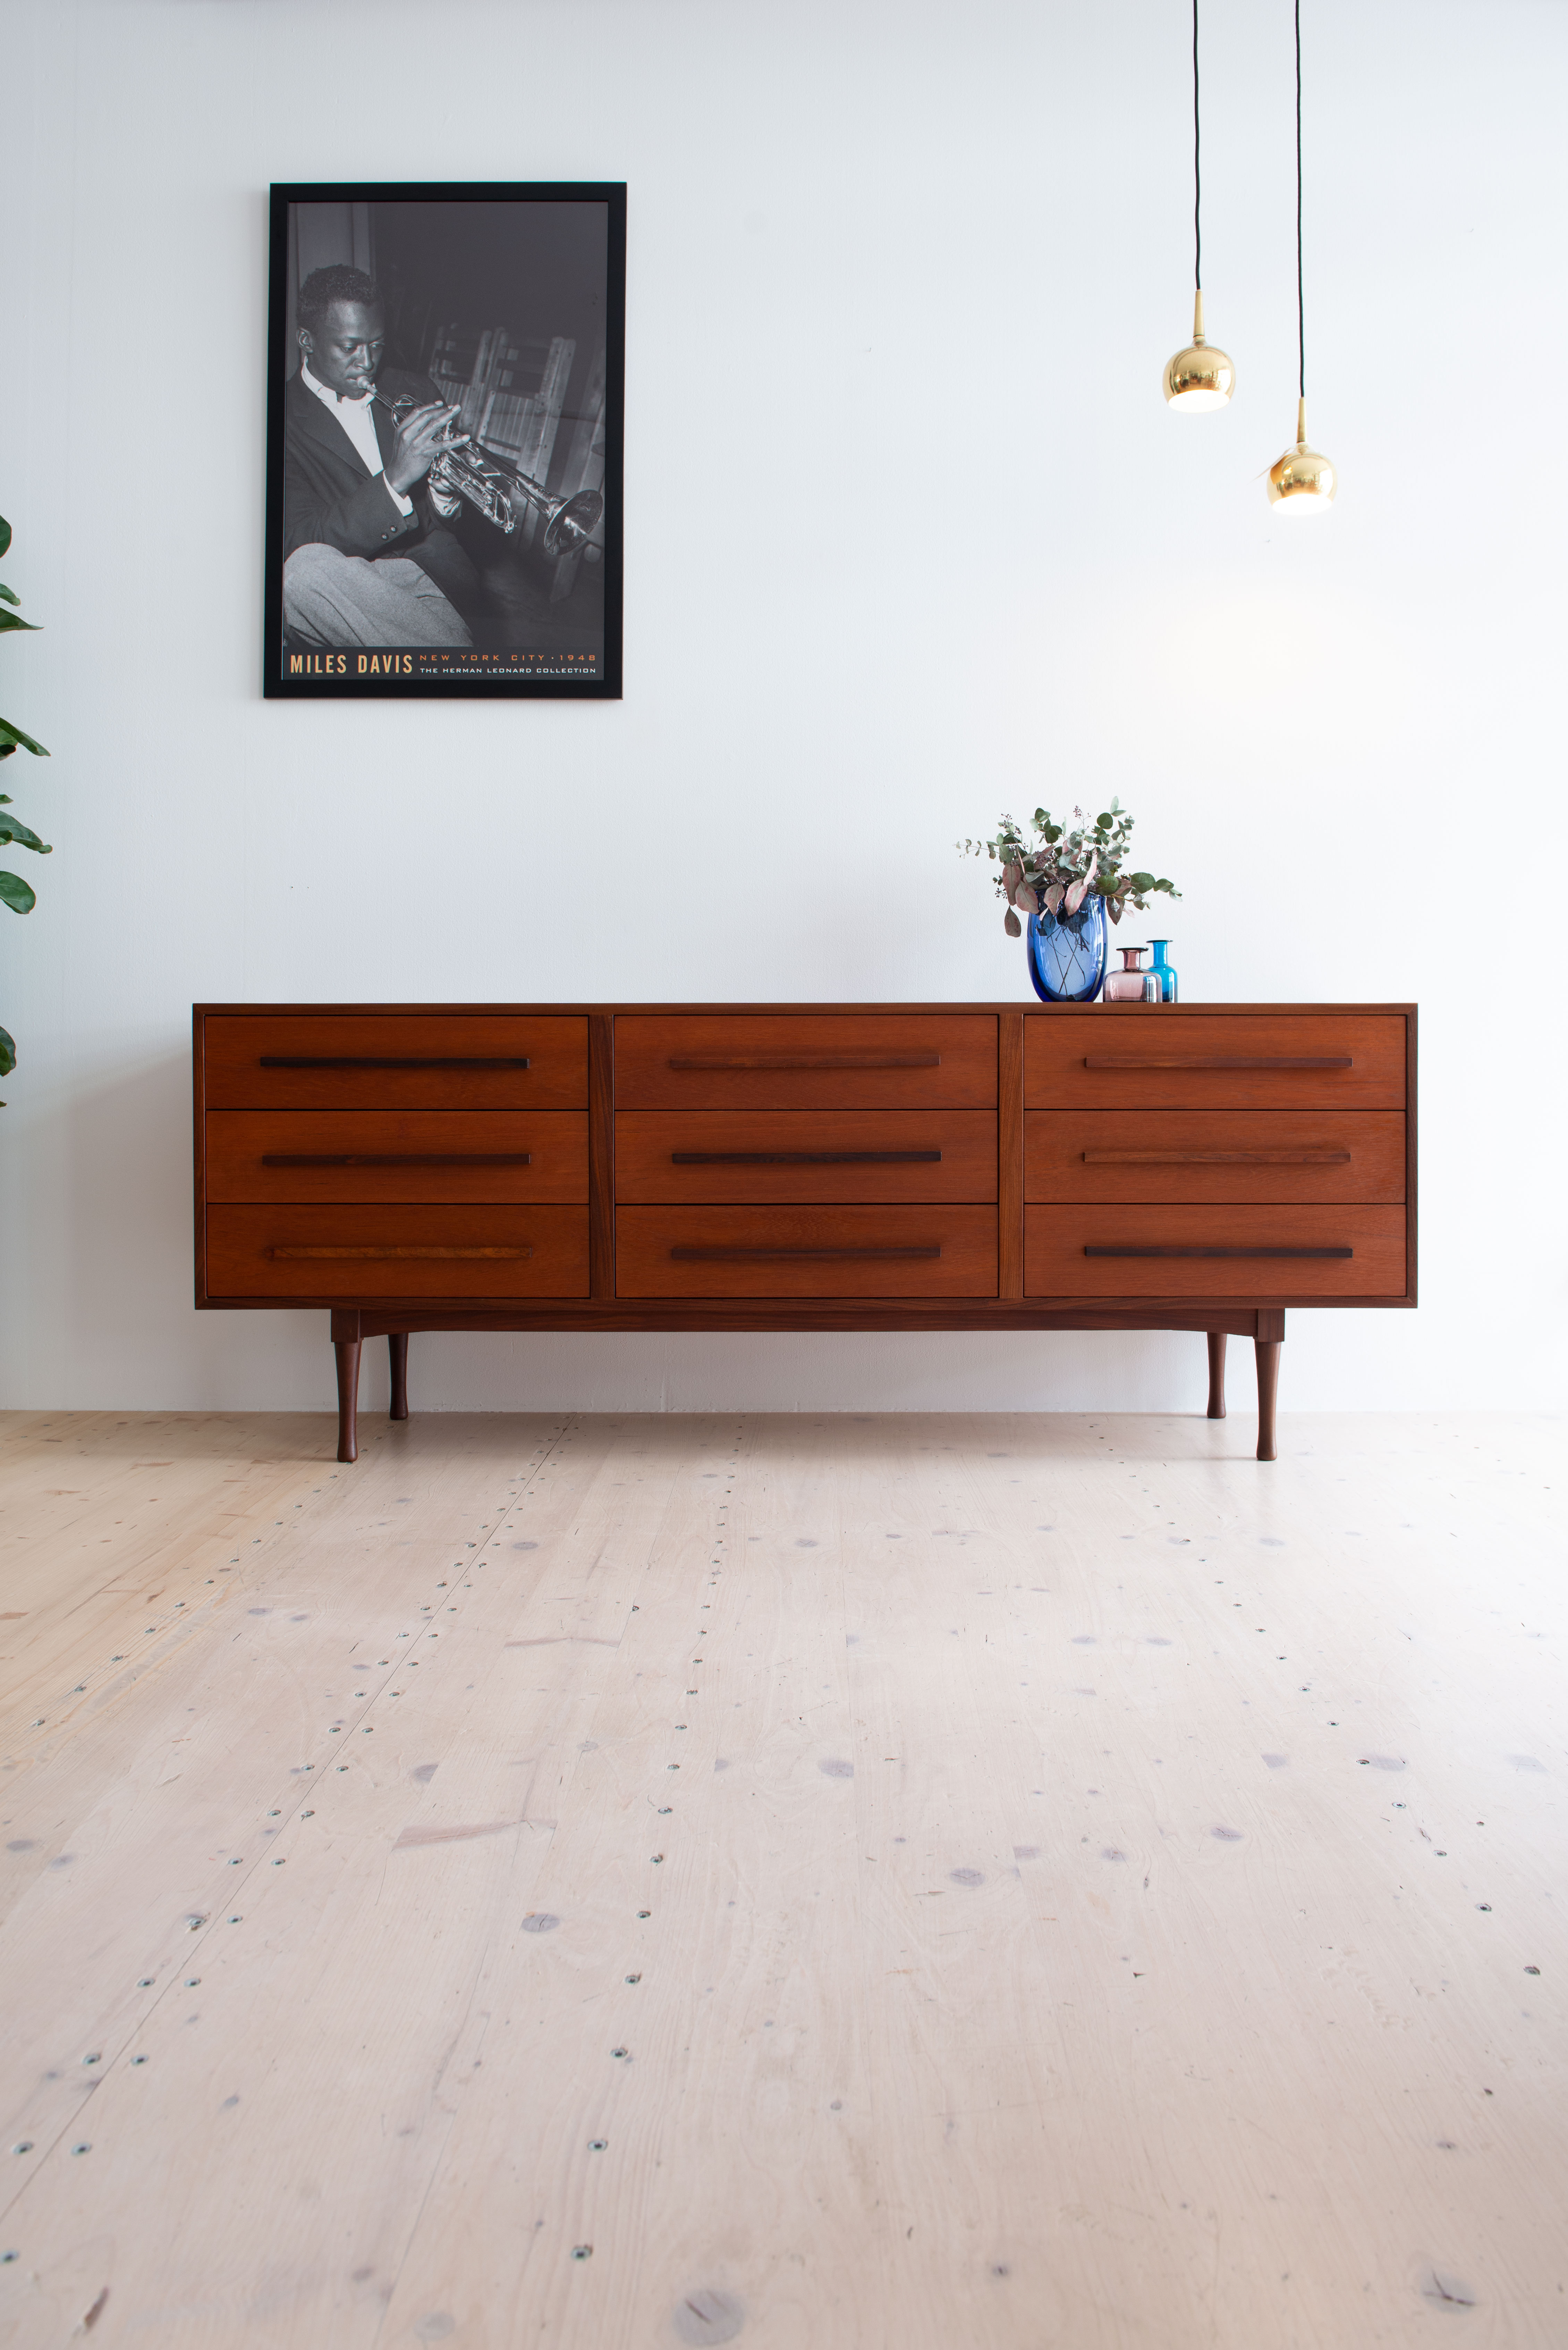 Canadian Made Teak Sideboard with Drawers. Produced by RS Associates in Canada, 1960s. Available at heyday möbel, Grubenstrasse 19, 8045 Zürich.